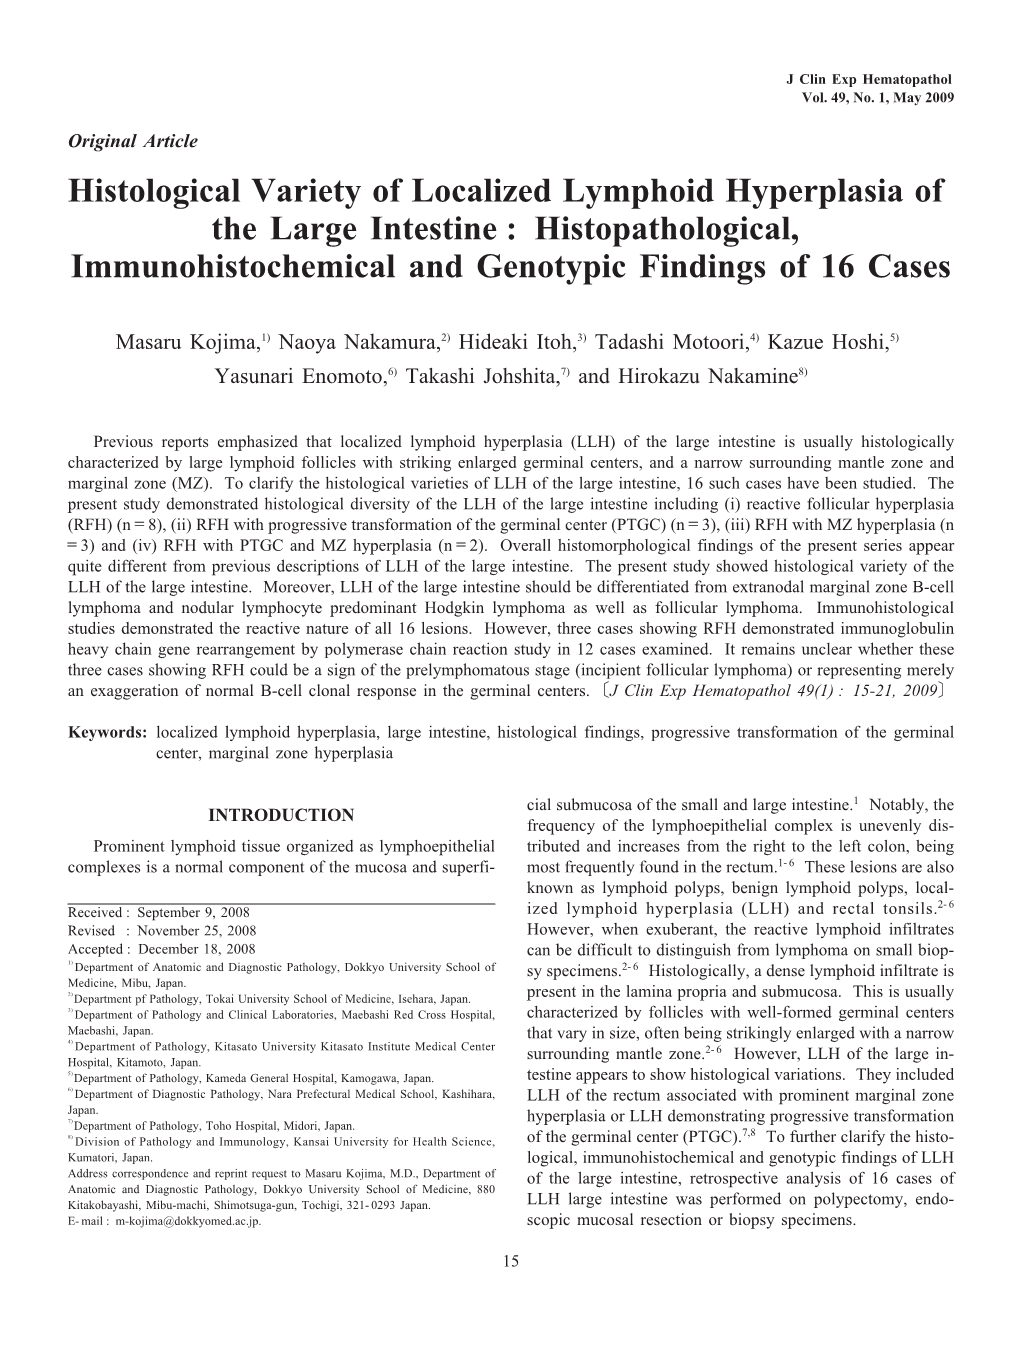 Histological Variety of Localized Lymphoid Hyperplasia of the Large Intestine : Histopathological, Immunohistochemical and Genotypic Findings of 16 Cases